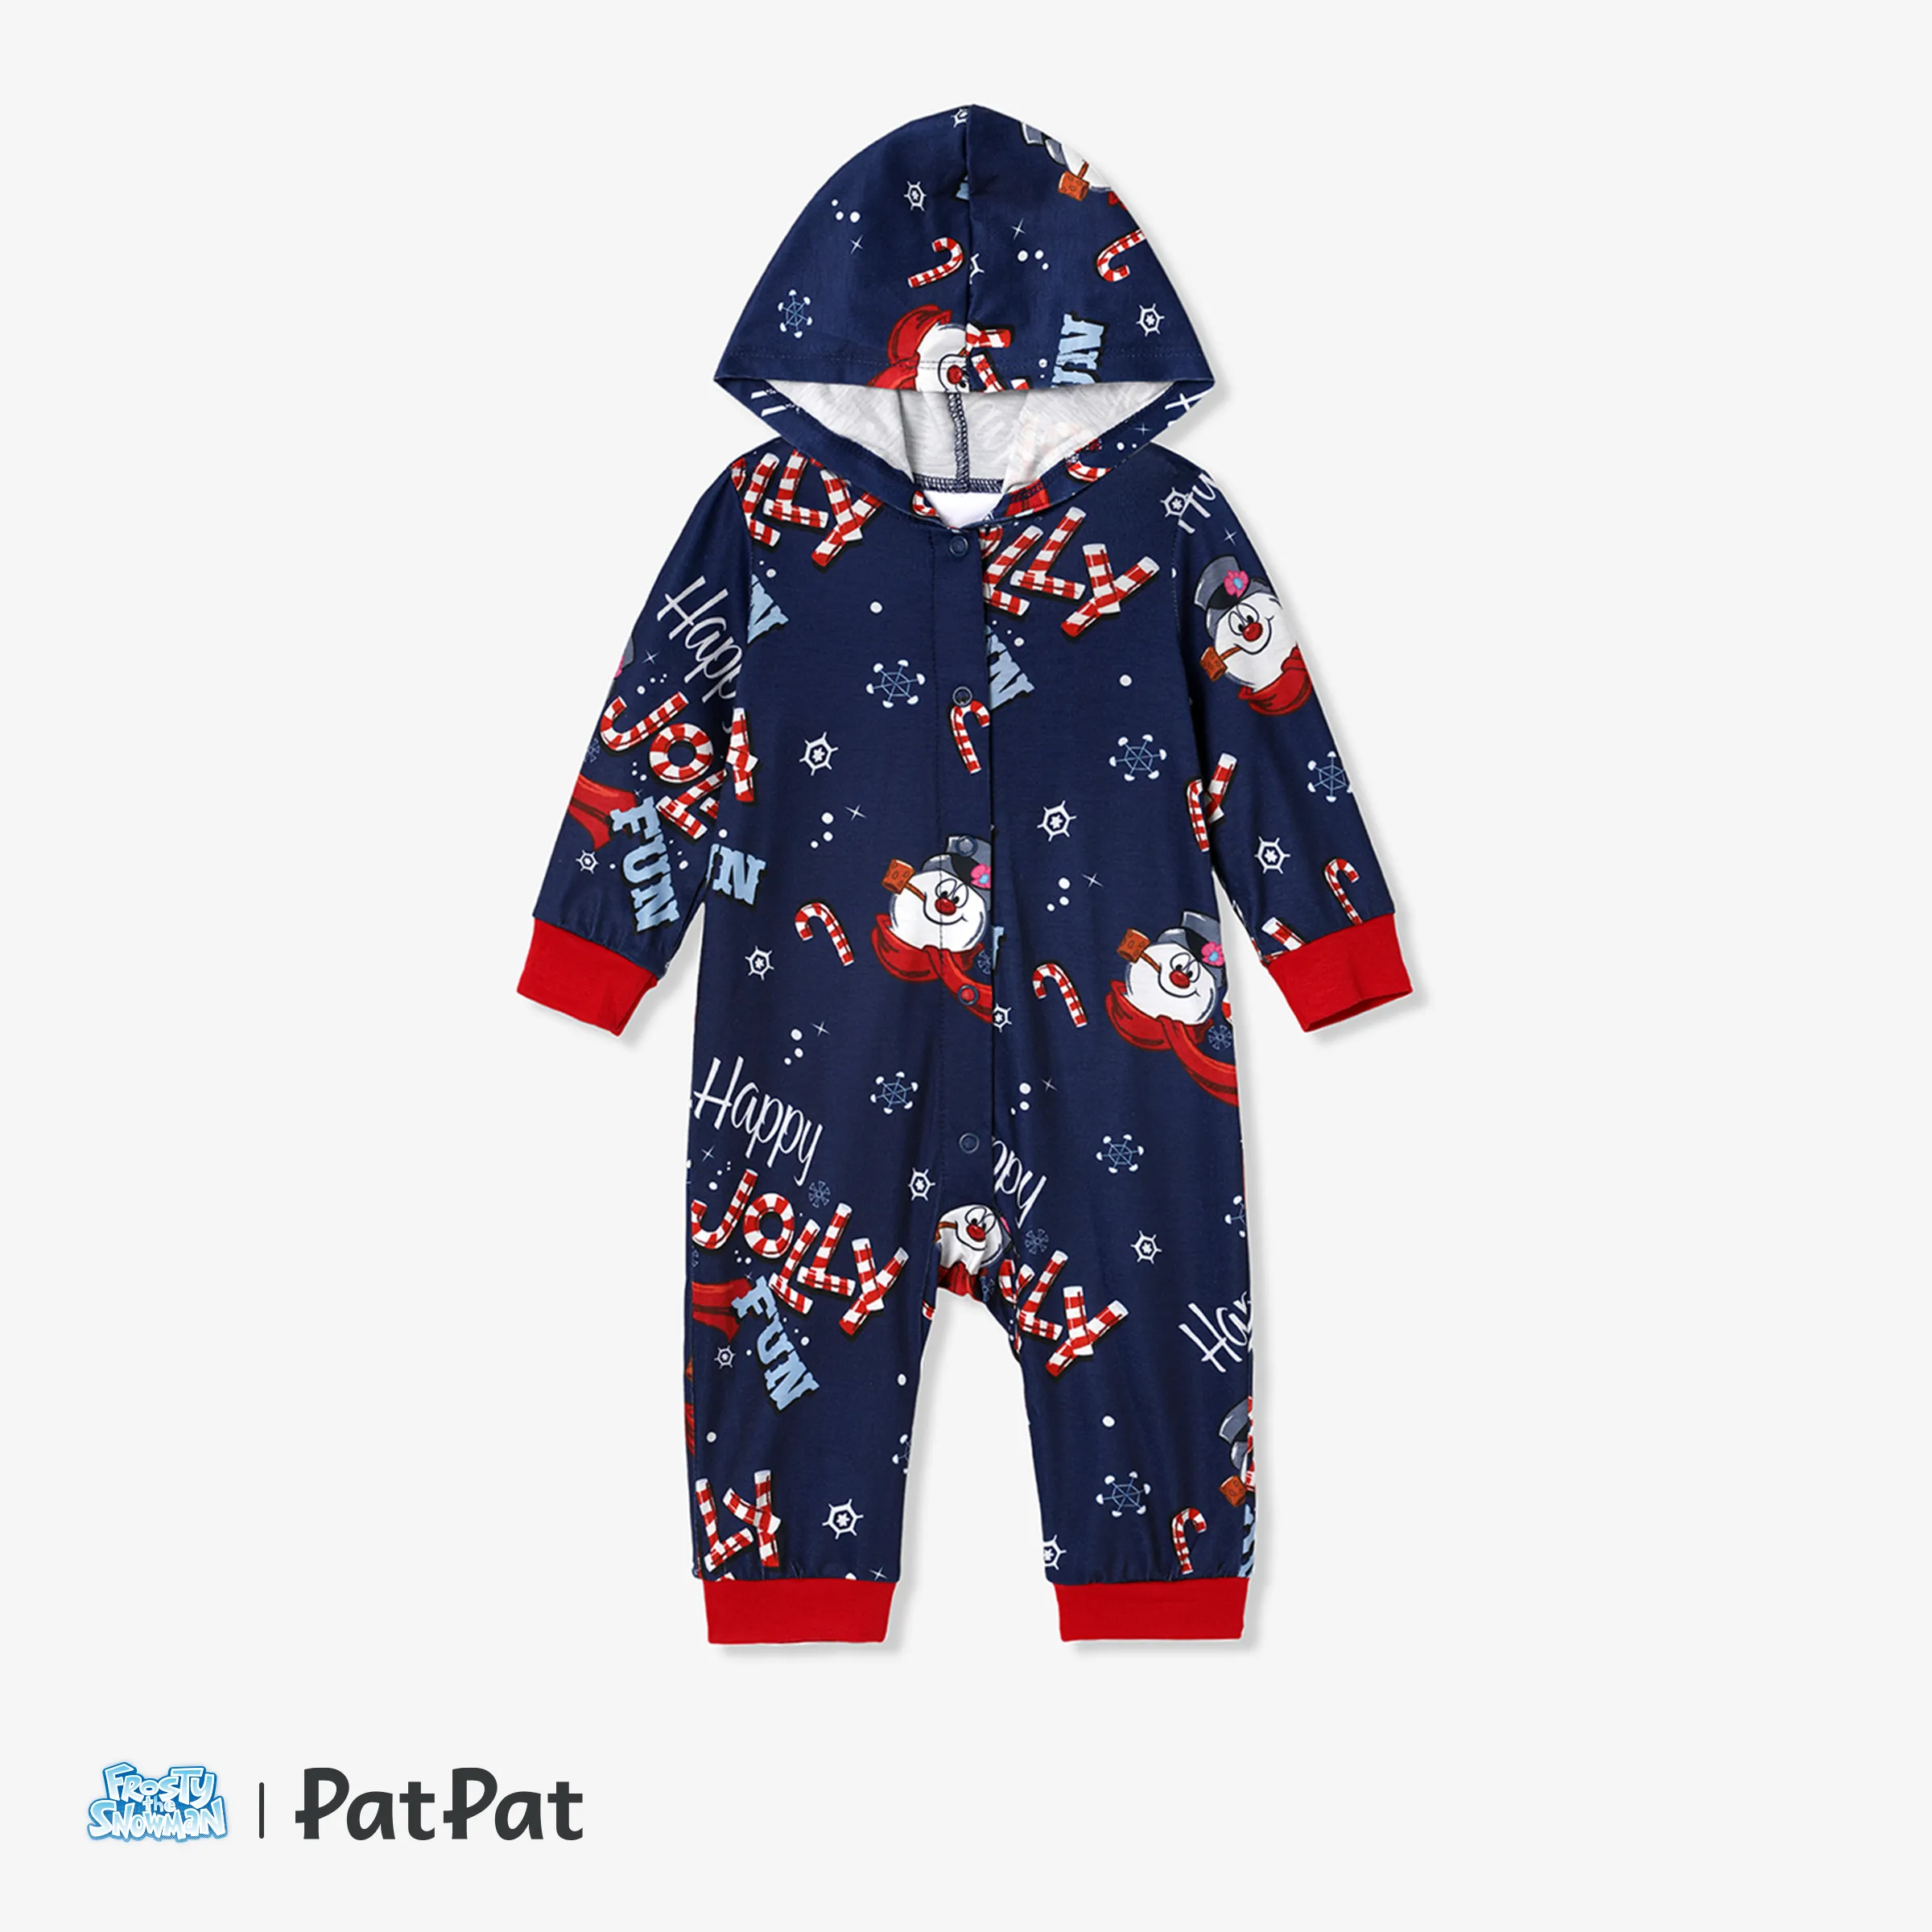 Frosty The Snowman Family Matching Christmas Allover Zip-up Hooded Onesies Pajamas(Flame Resistant)